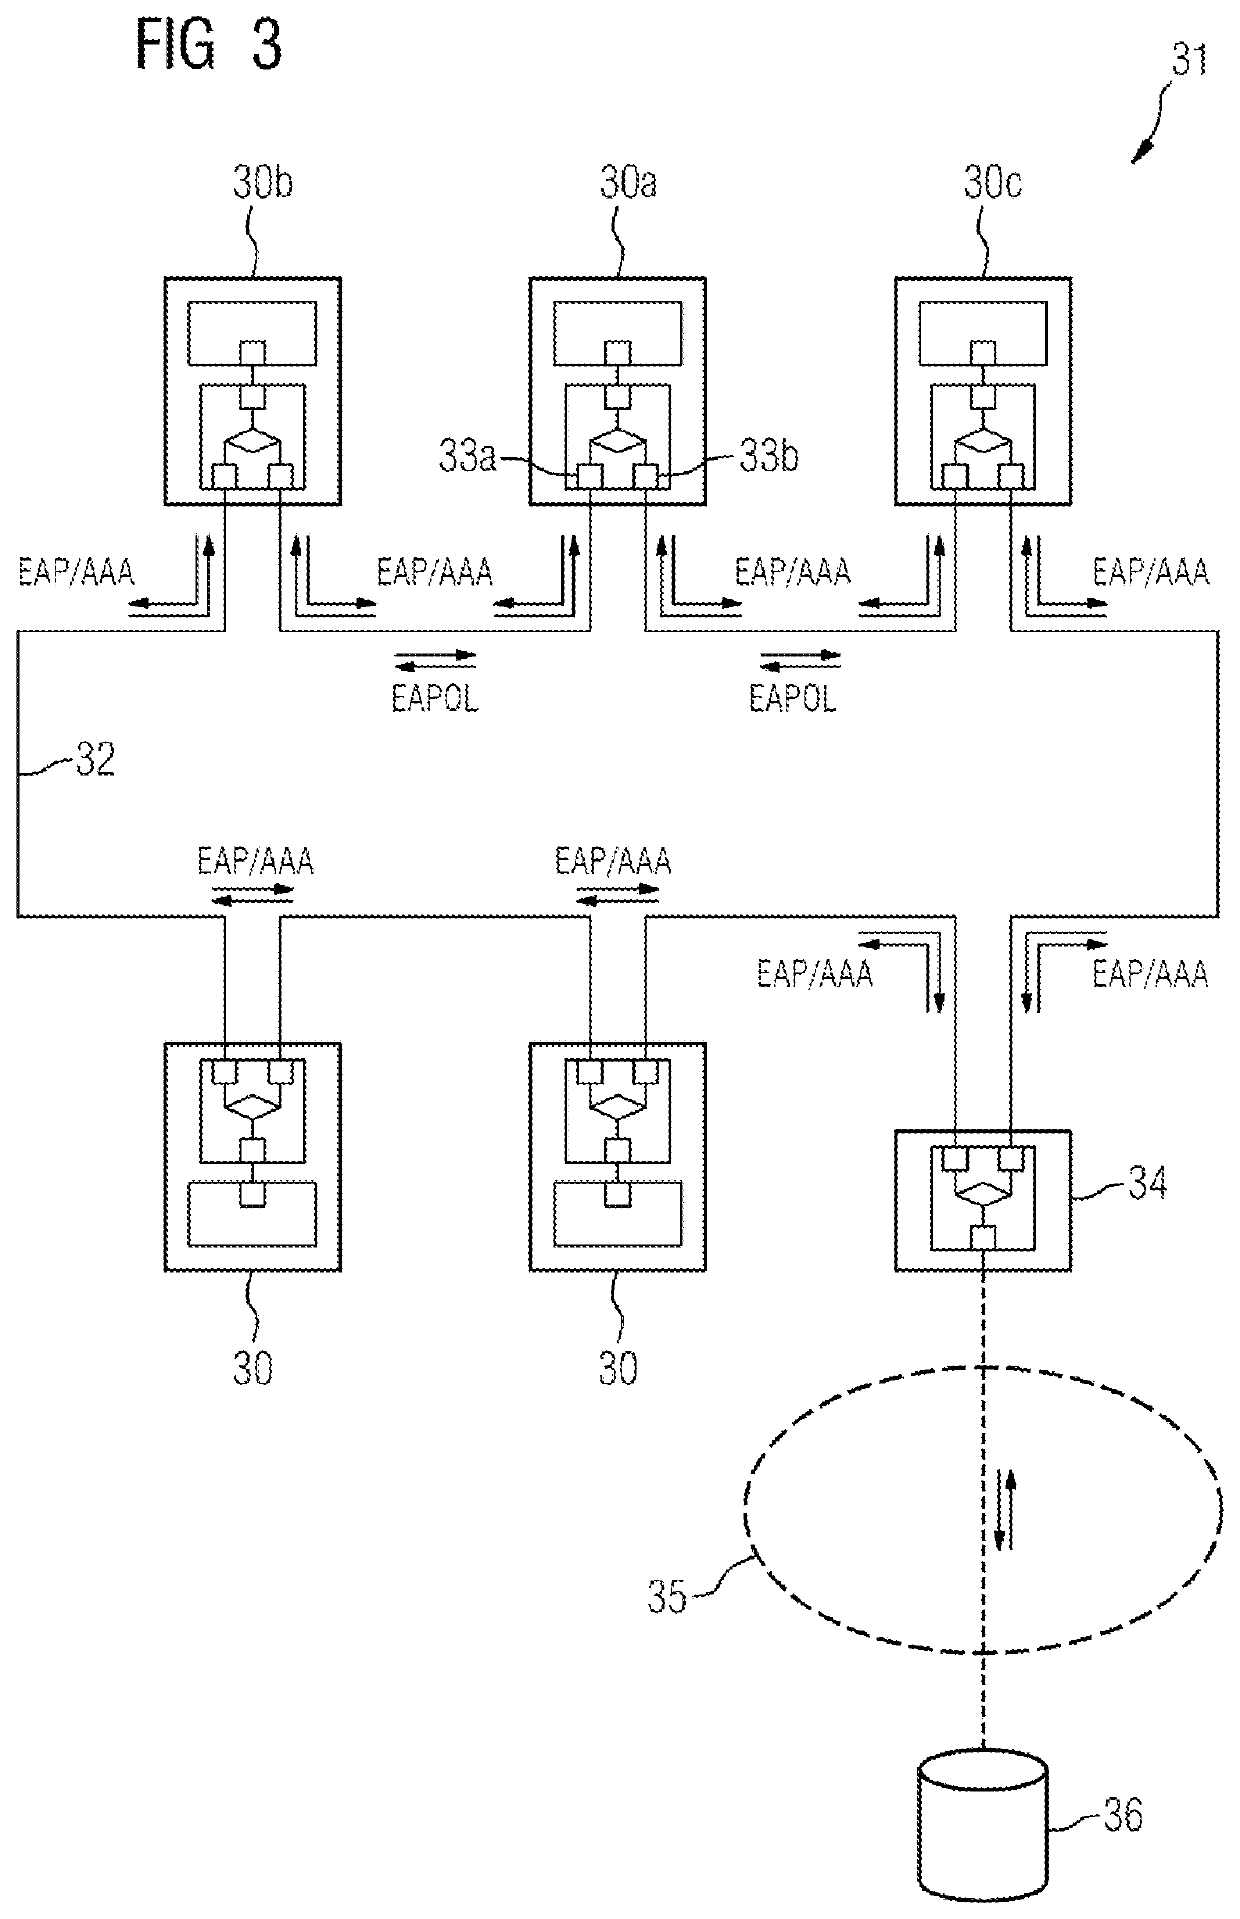 Authenticating a device in a communication network of an automation installation